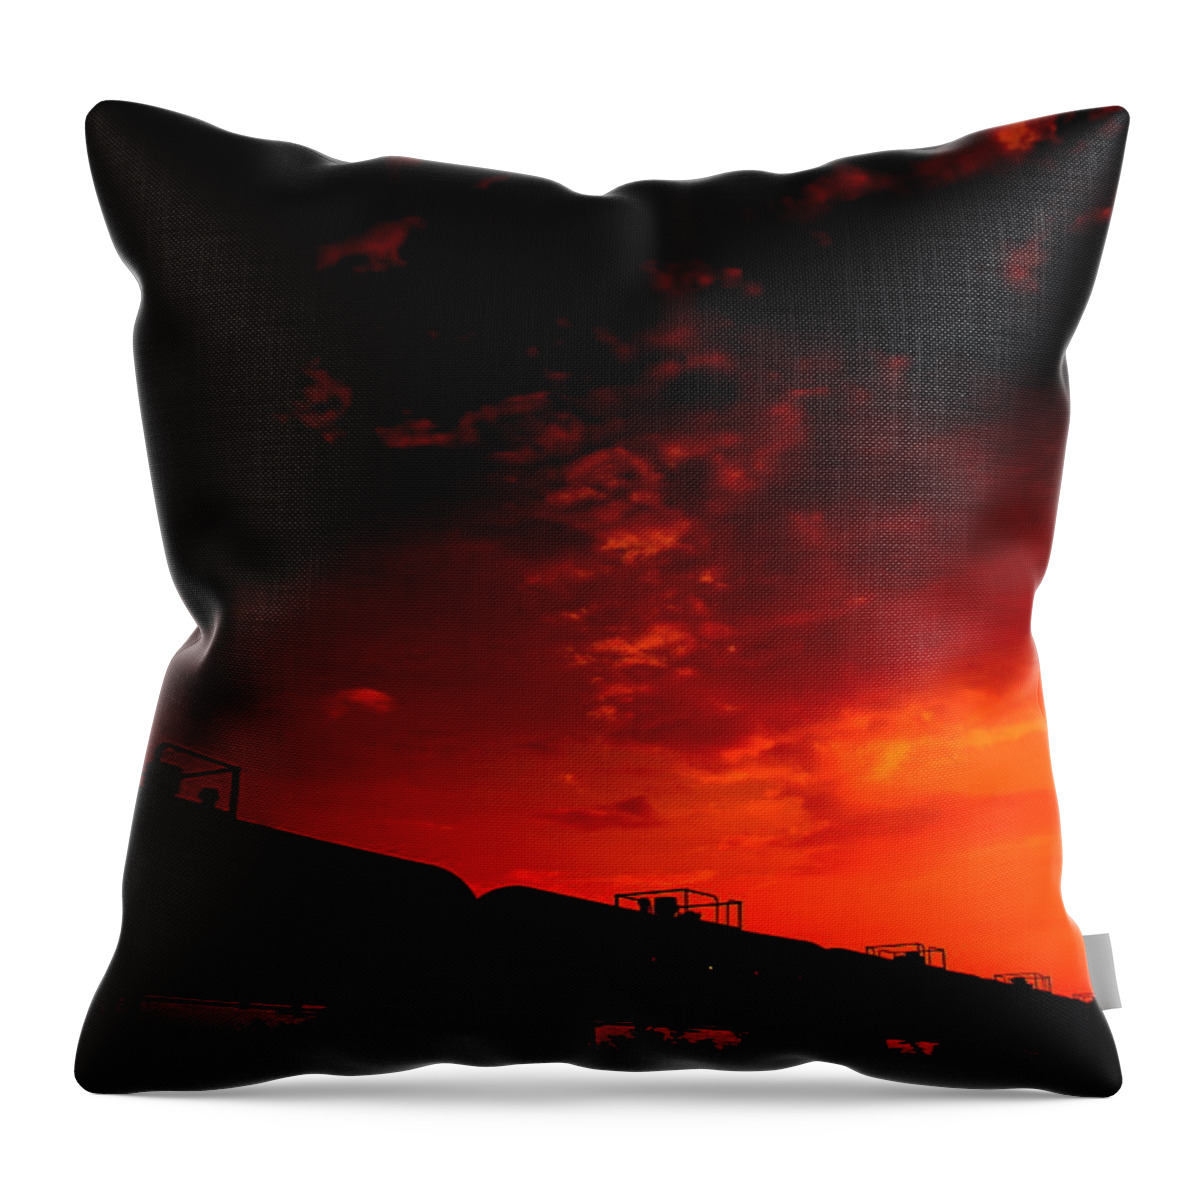 Into The Fire Throw Pillow featuring the photograph Into The Fire by Edward Smith